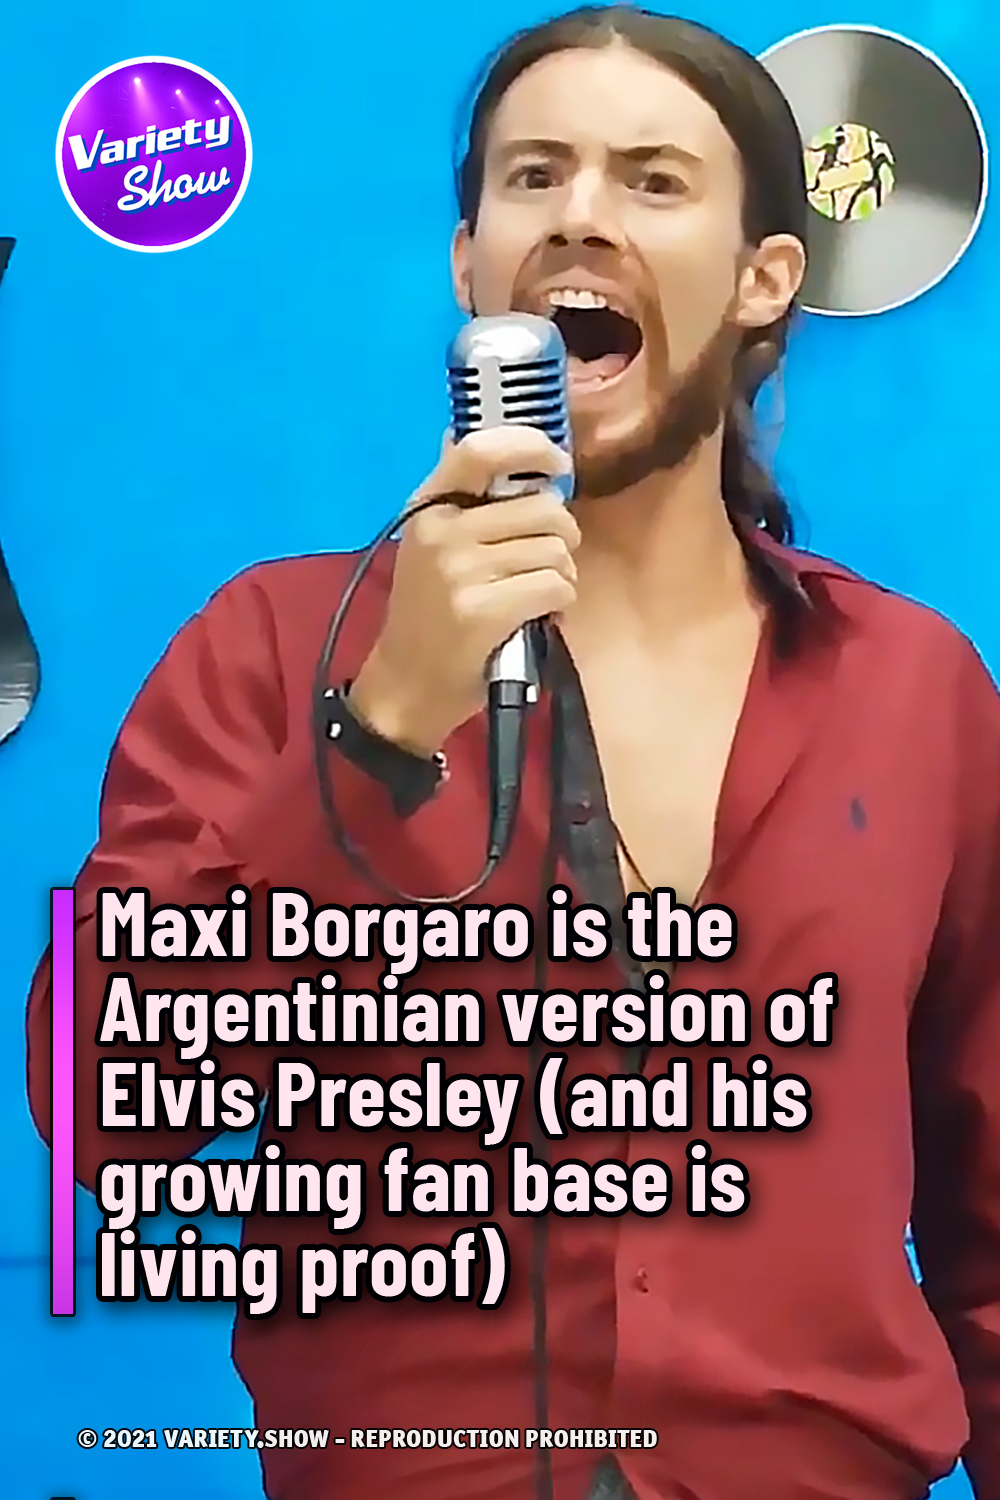 Maxi Borgaro is the Argentinian version of Elvis Presley (and his growing fan base is living proof)